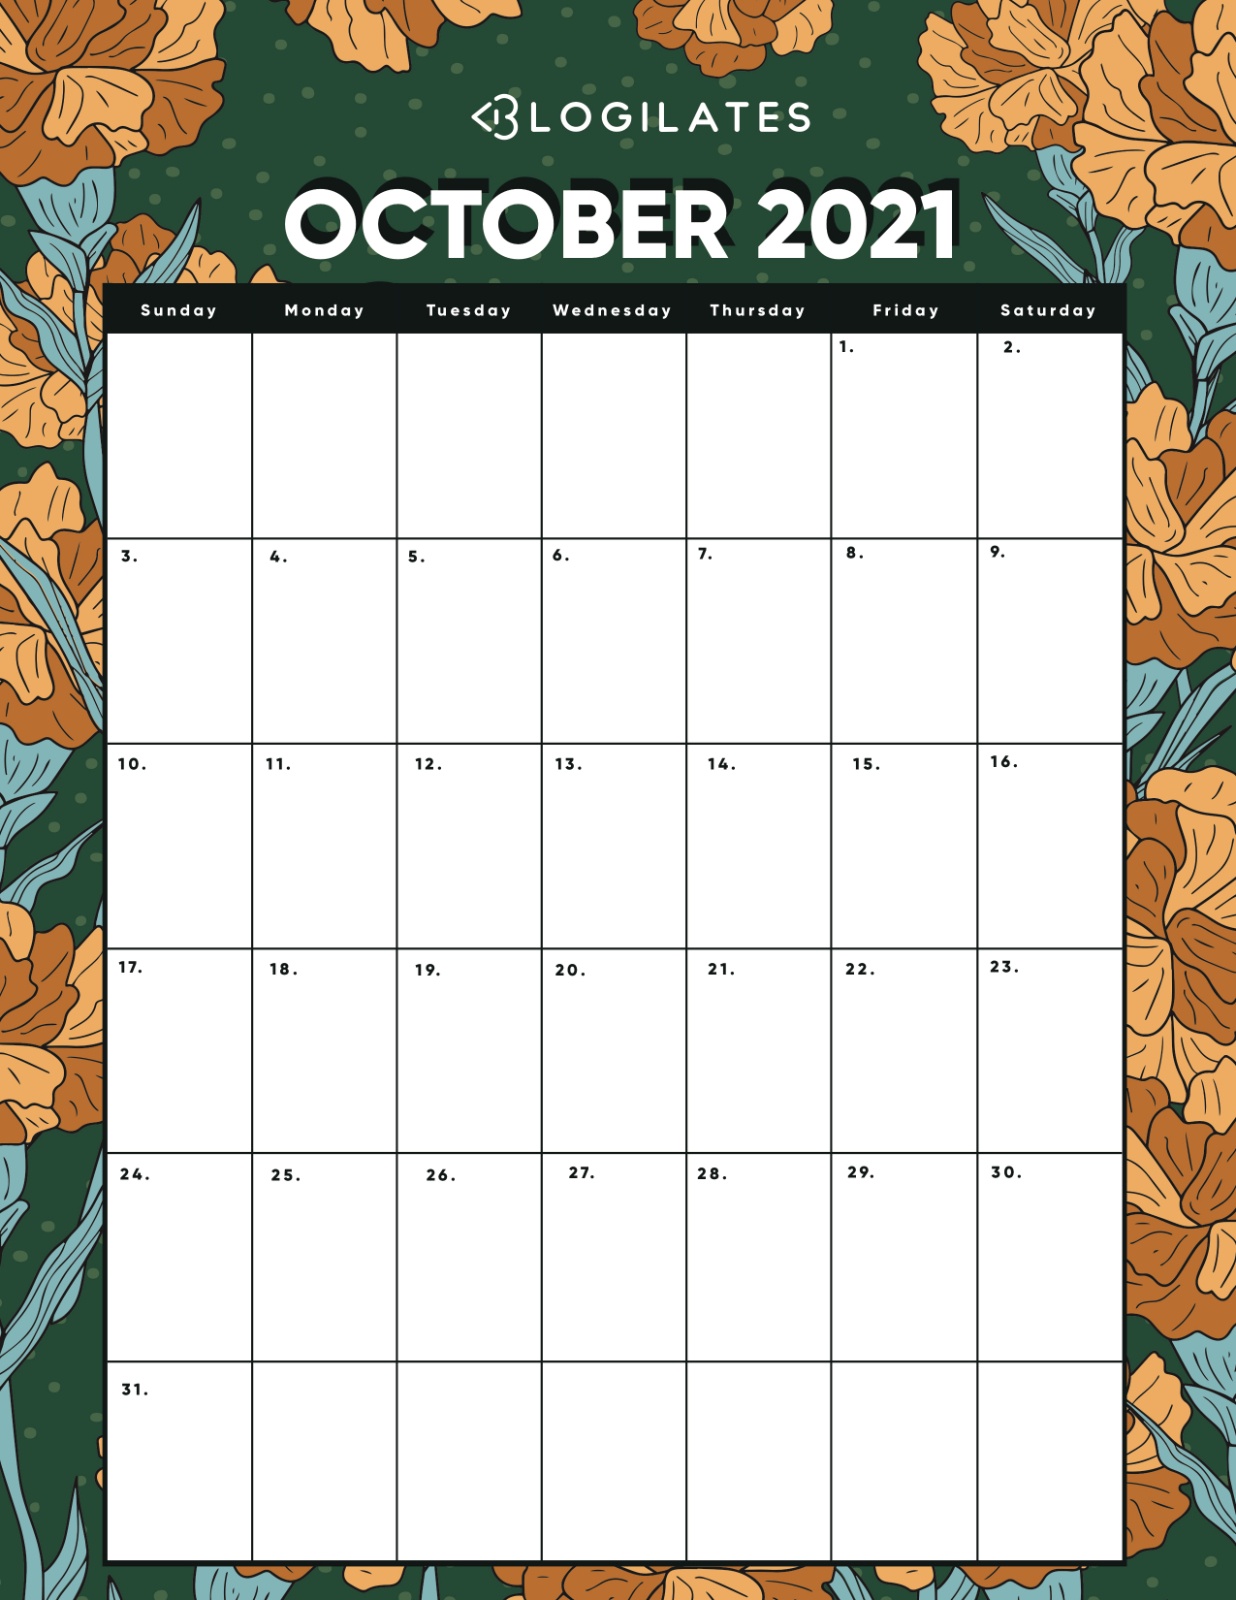 Your FREE 2021 Printable Calendars are HERE! Blogilates